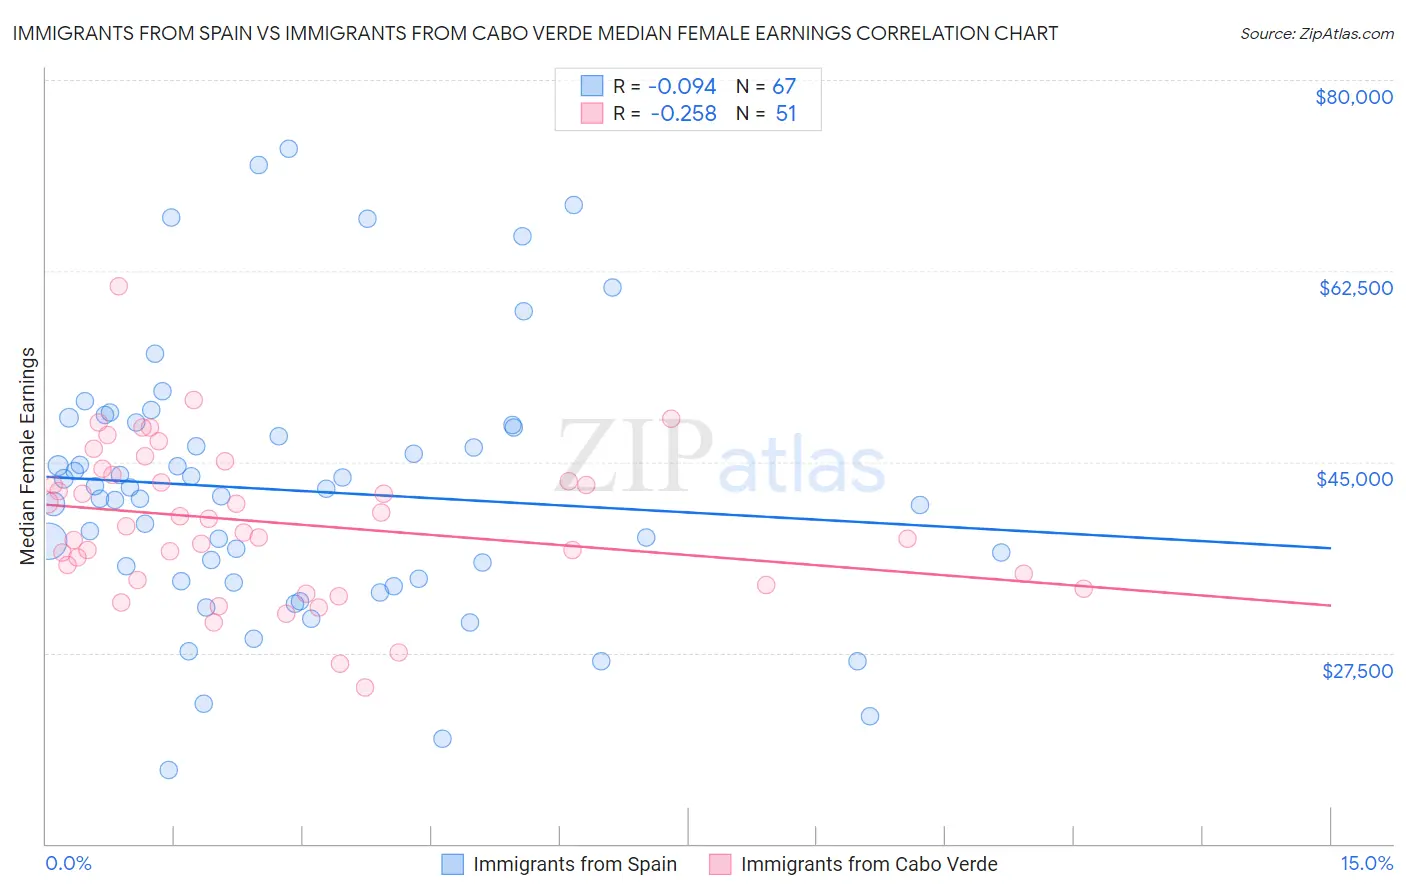 Immigrants from Spain vs Immigrants from Cabo Verde Median Female Earnings